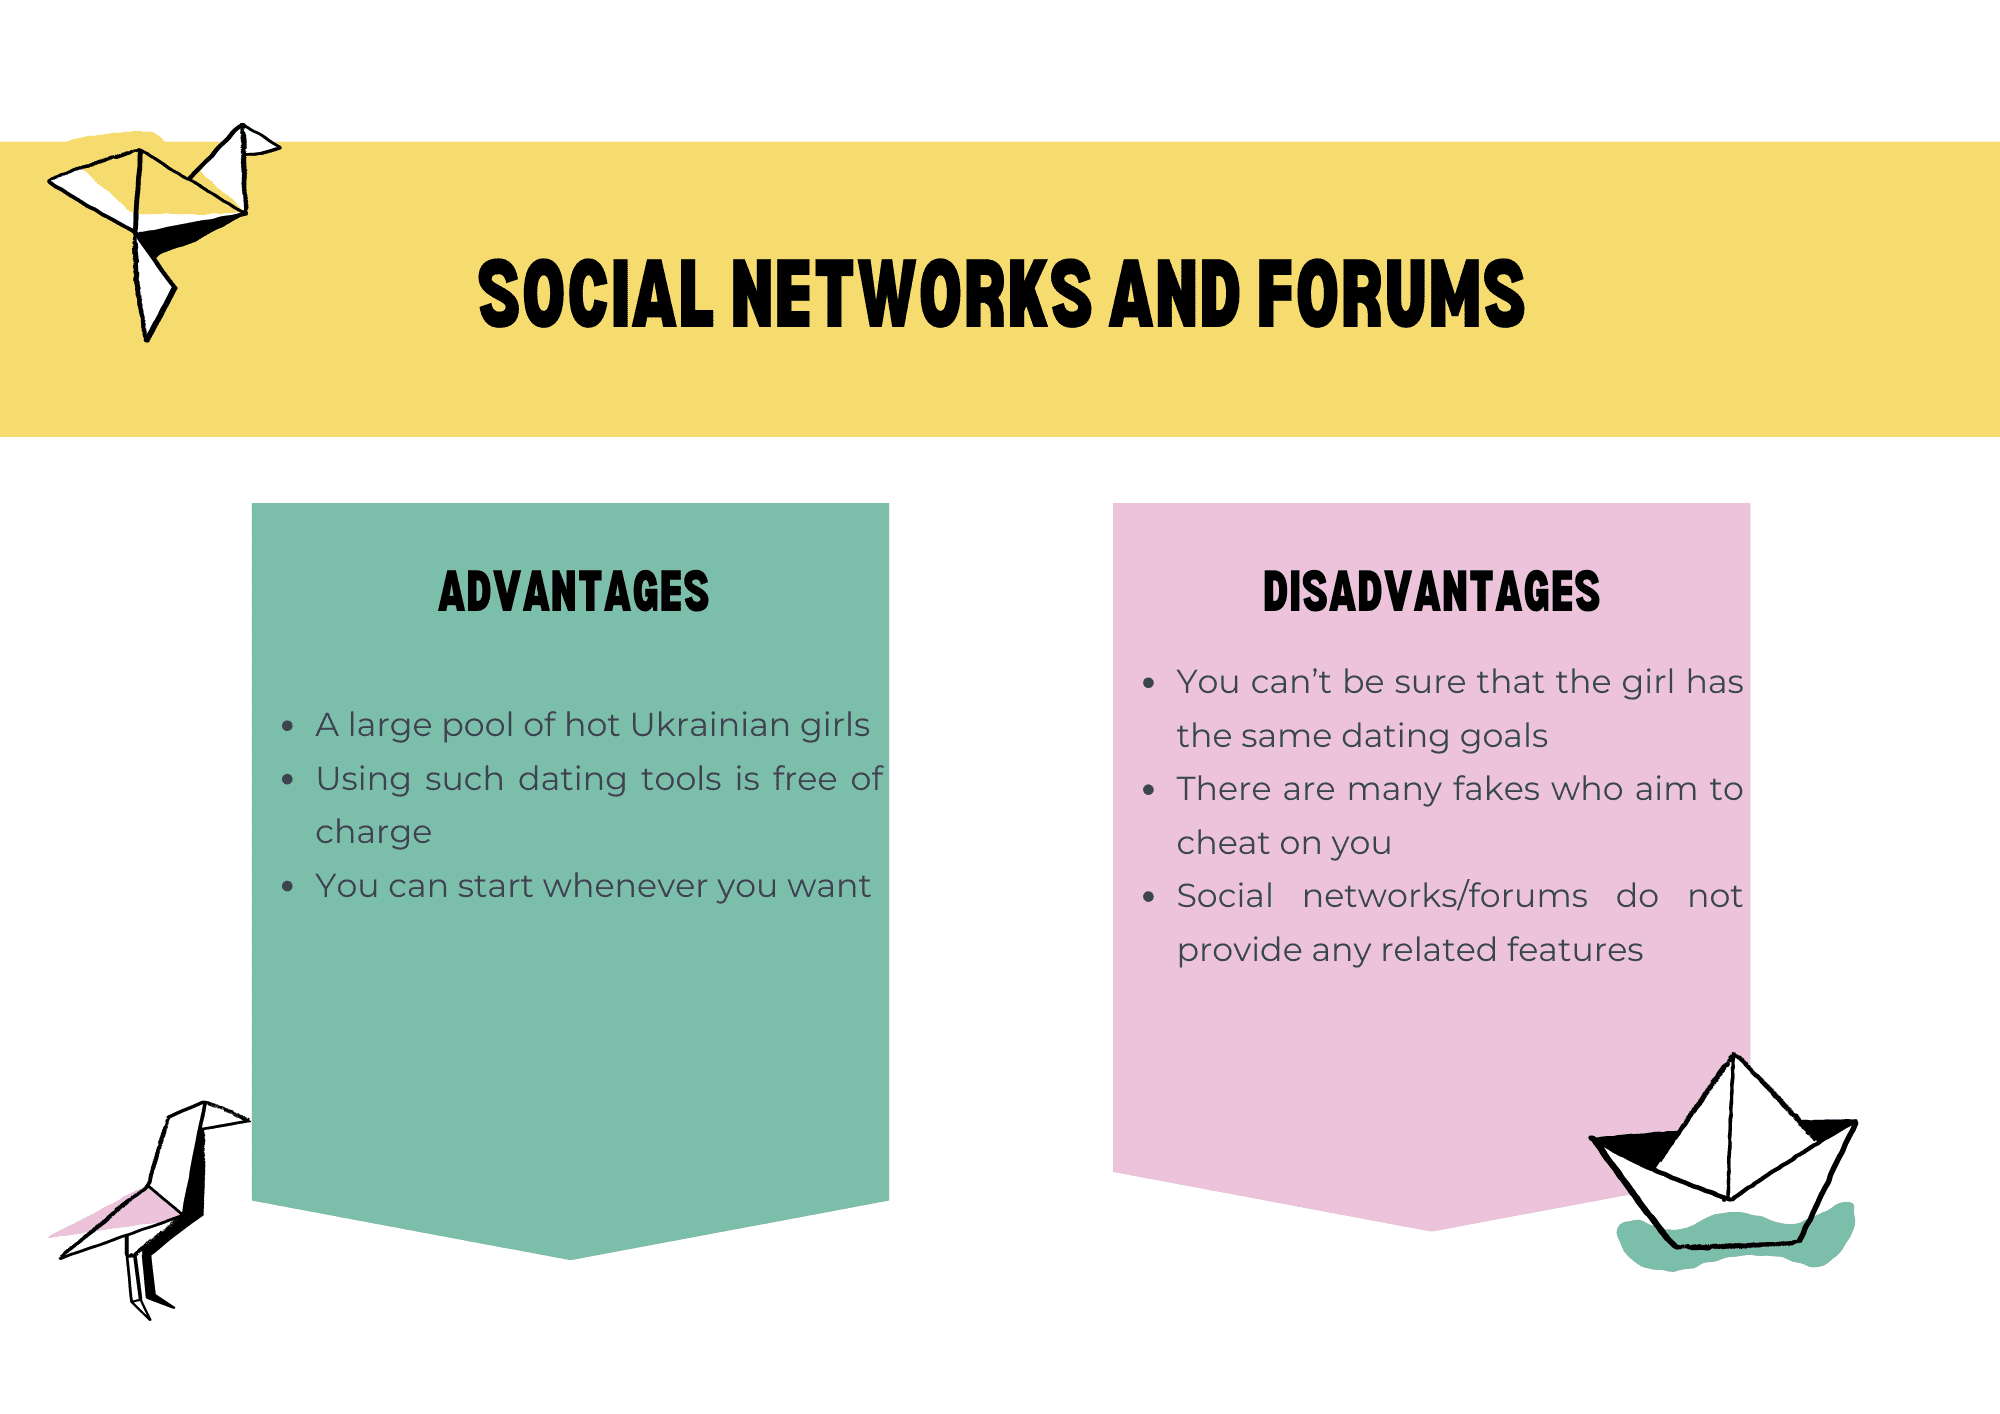 social networks and forum infographic